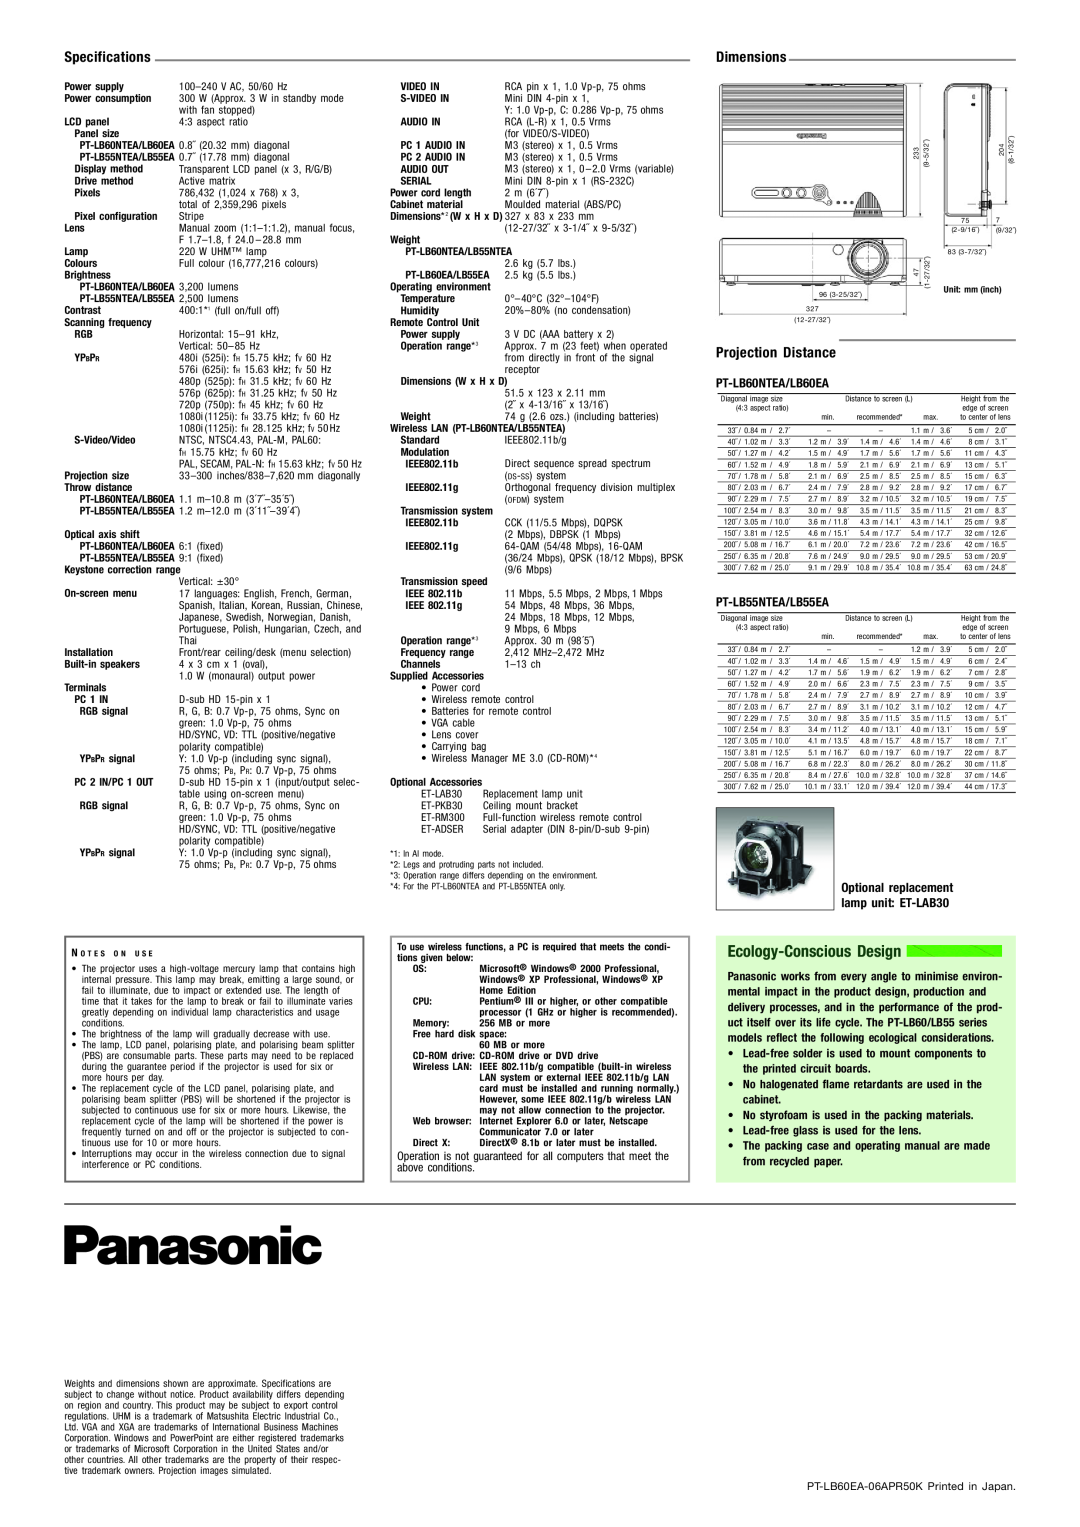 Panasonic PT-LB55NTEA, PT-LB60NTEA, PT-LB55EA, PT-LB60EA manual Specifications, Dimensions, Ecology-Conscious Design 